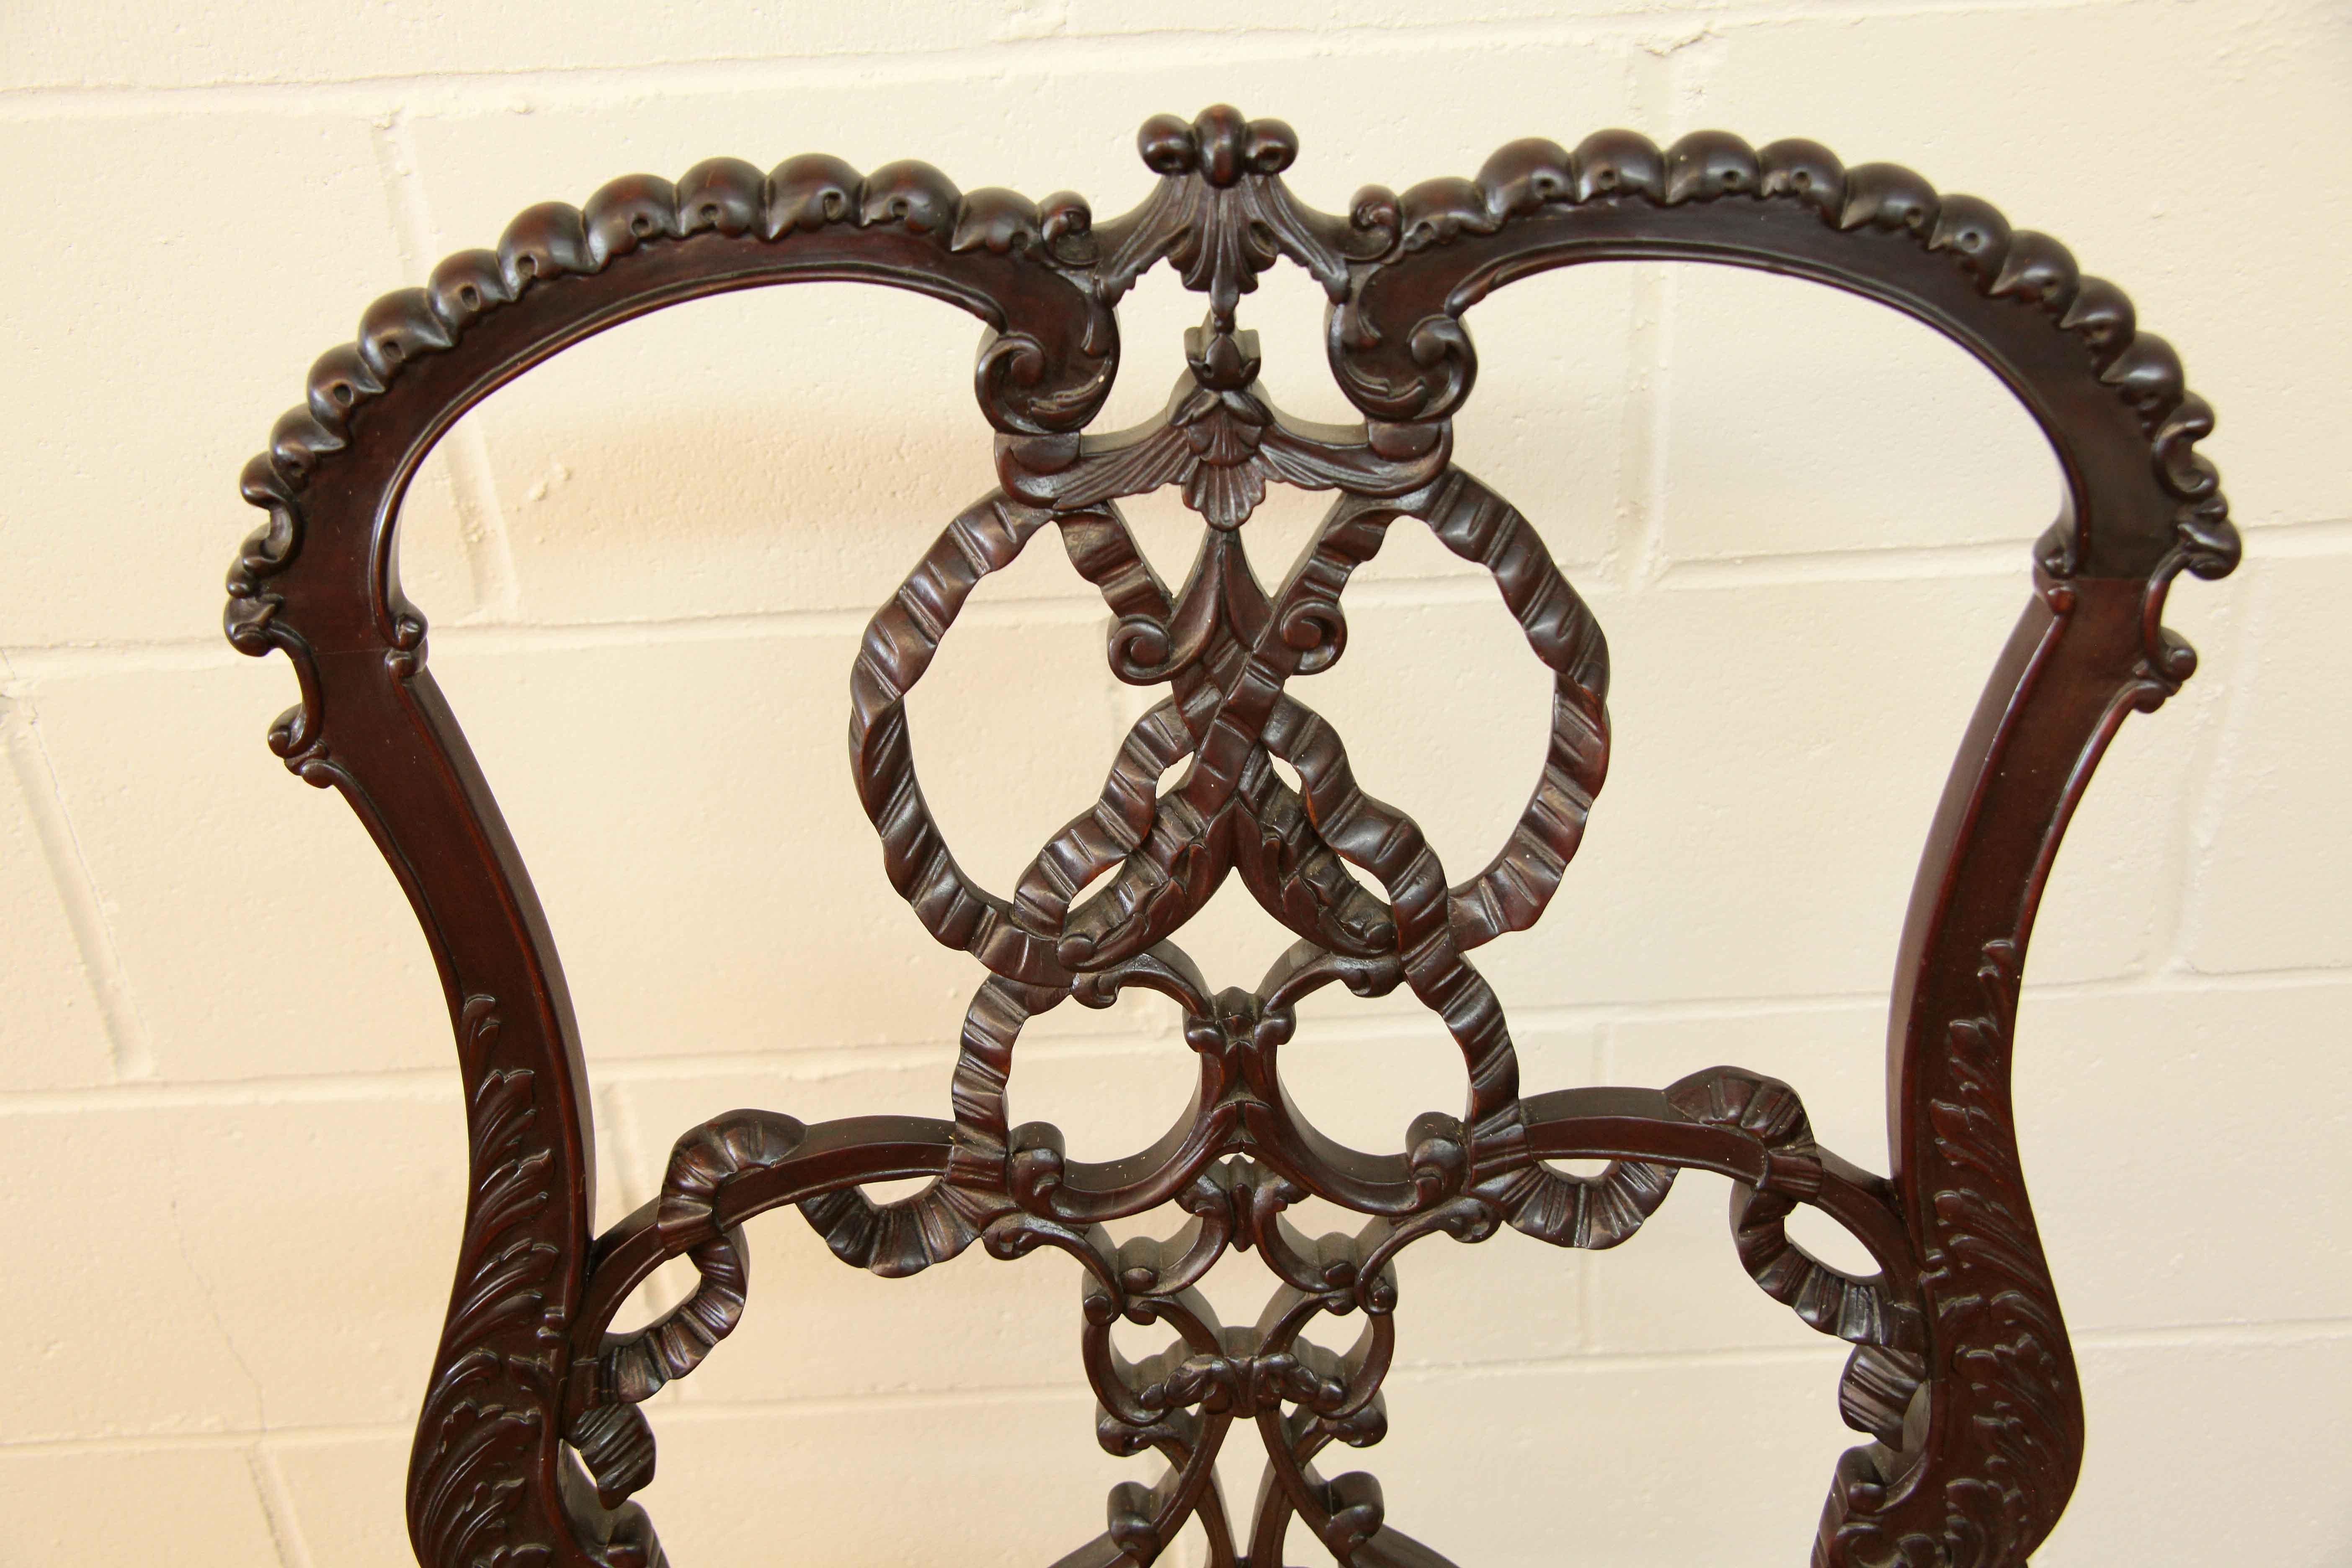 Chippendale style ribband back side chair, variations of this chair can been seen in Thomas Chippendale's 